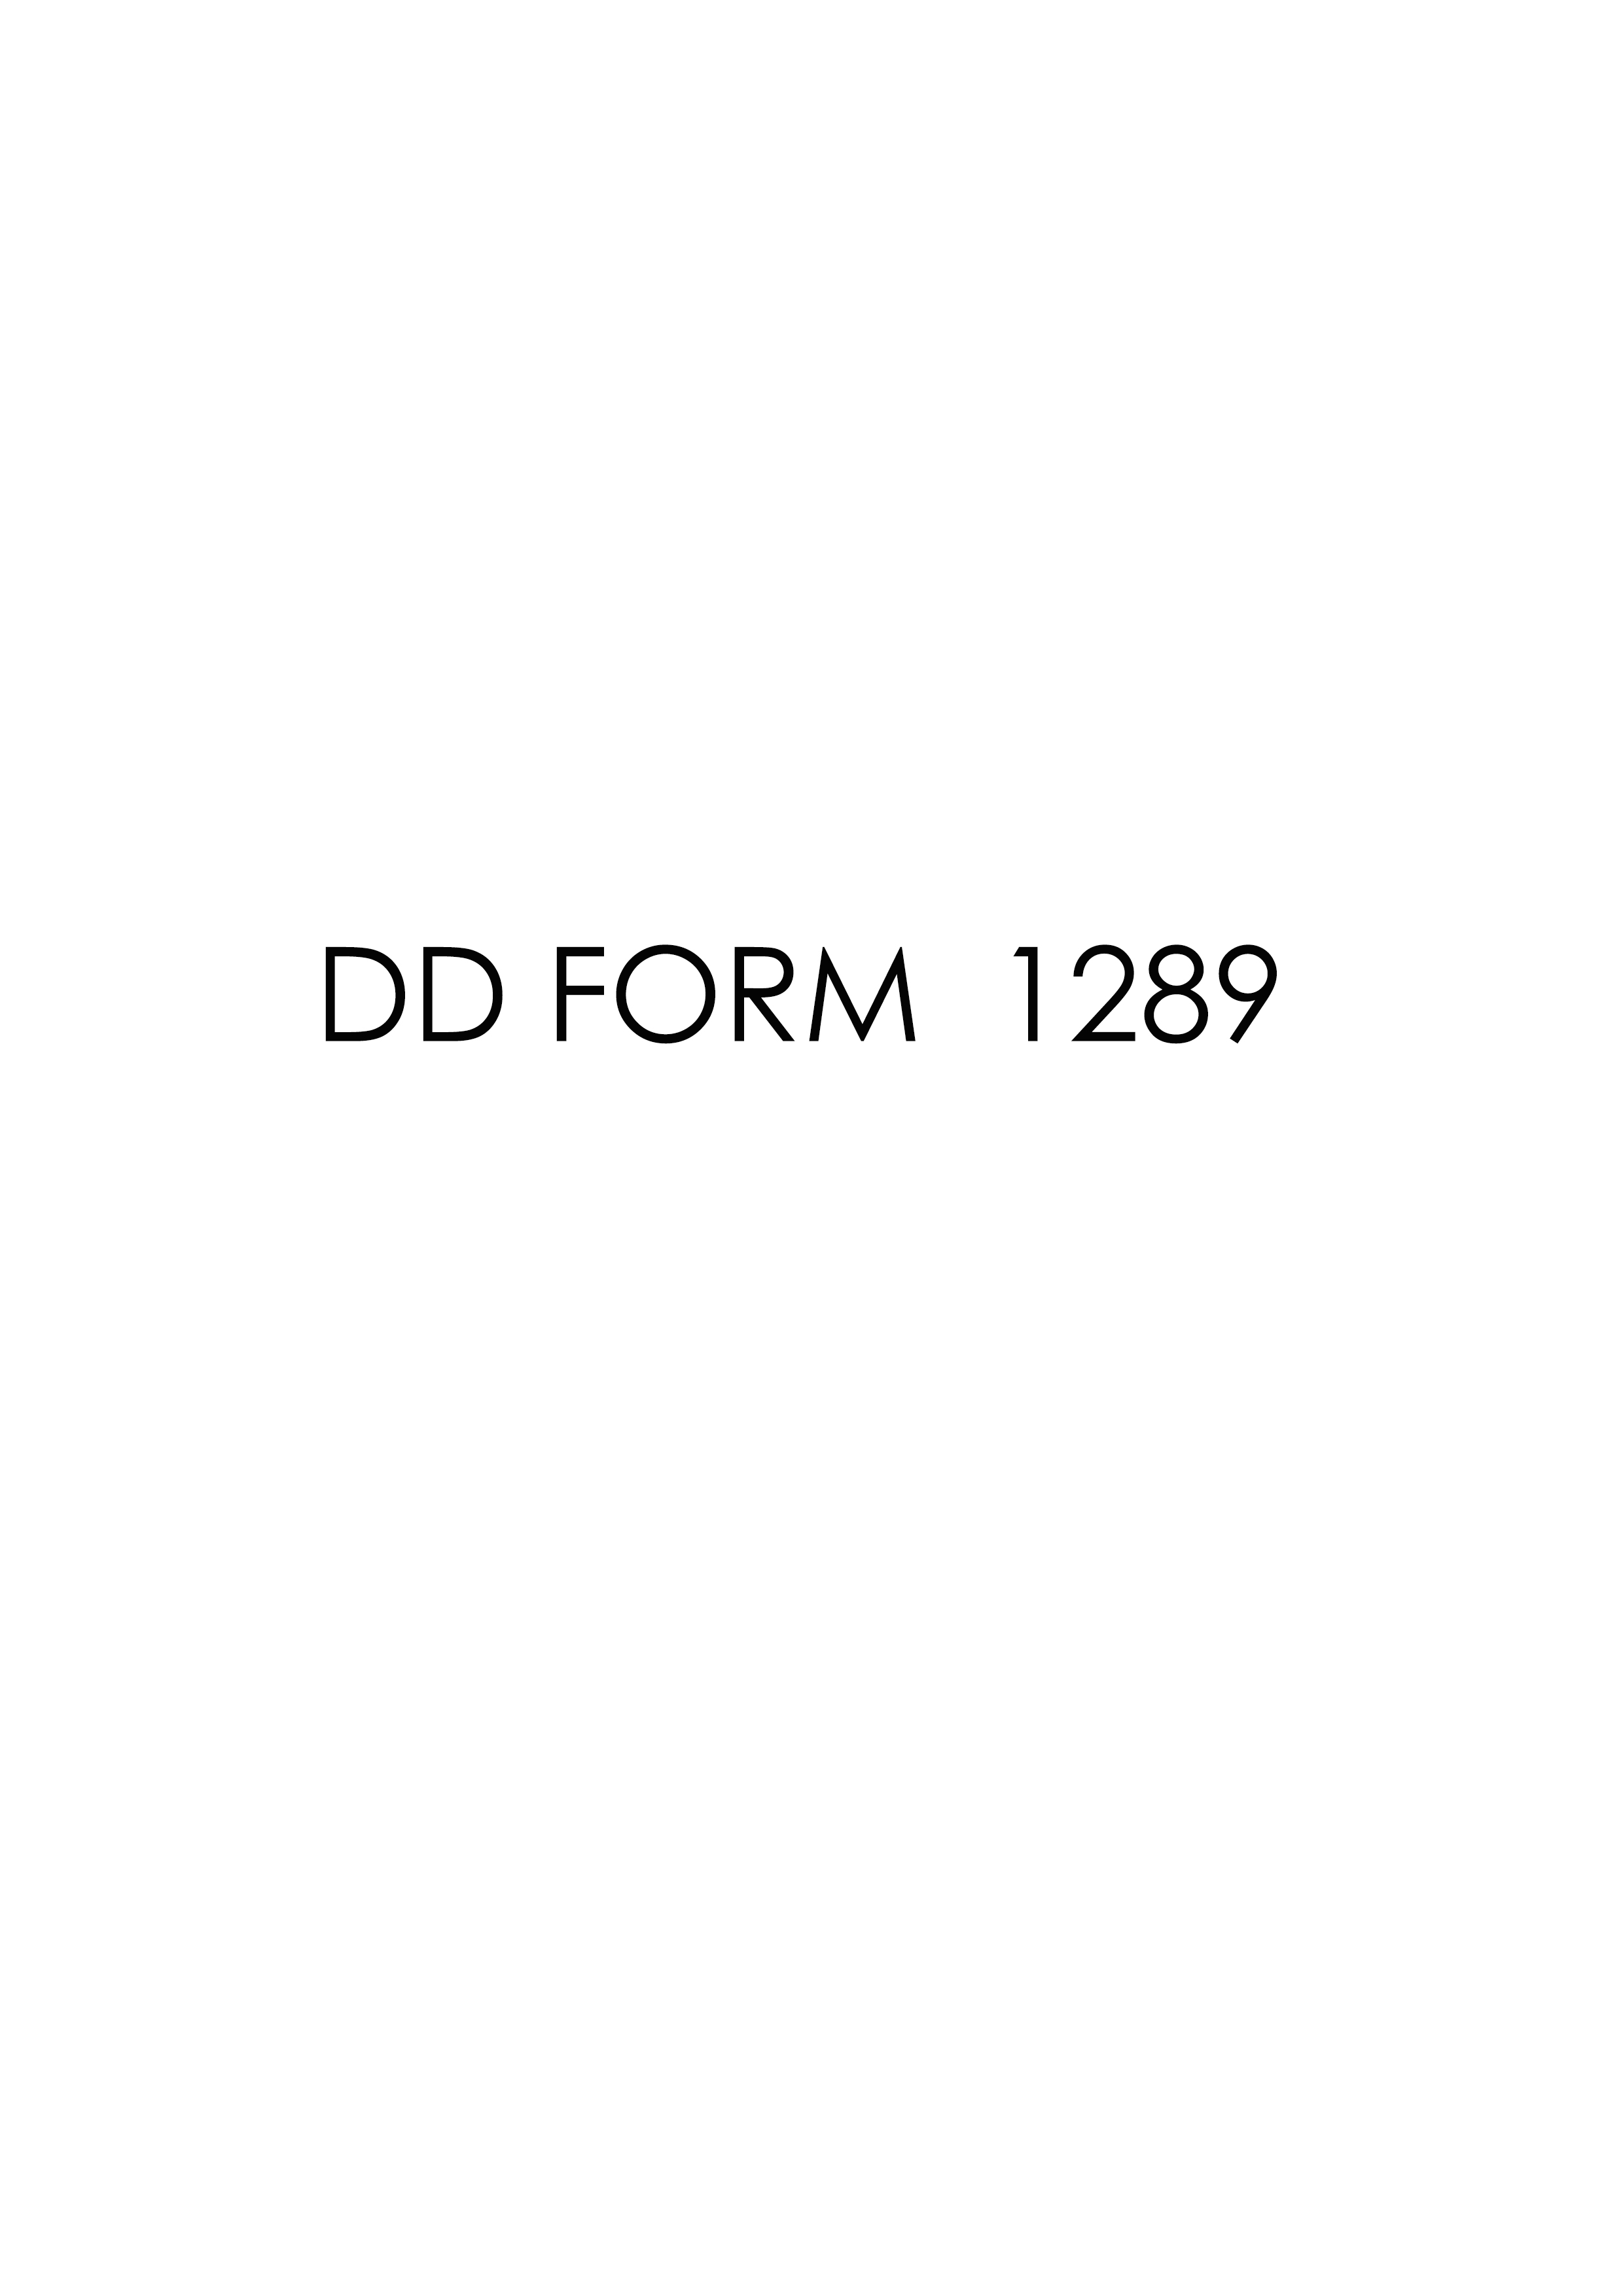 Download Fillable dd Form 1289